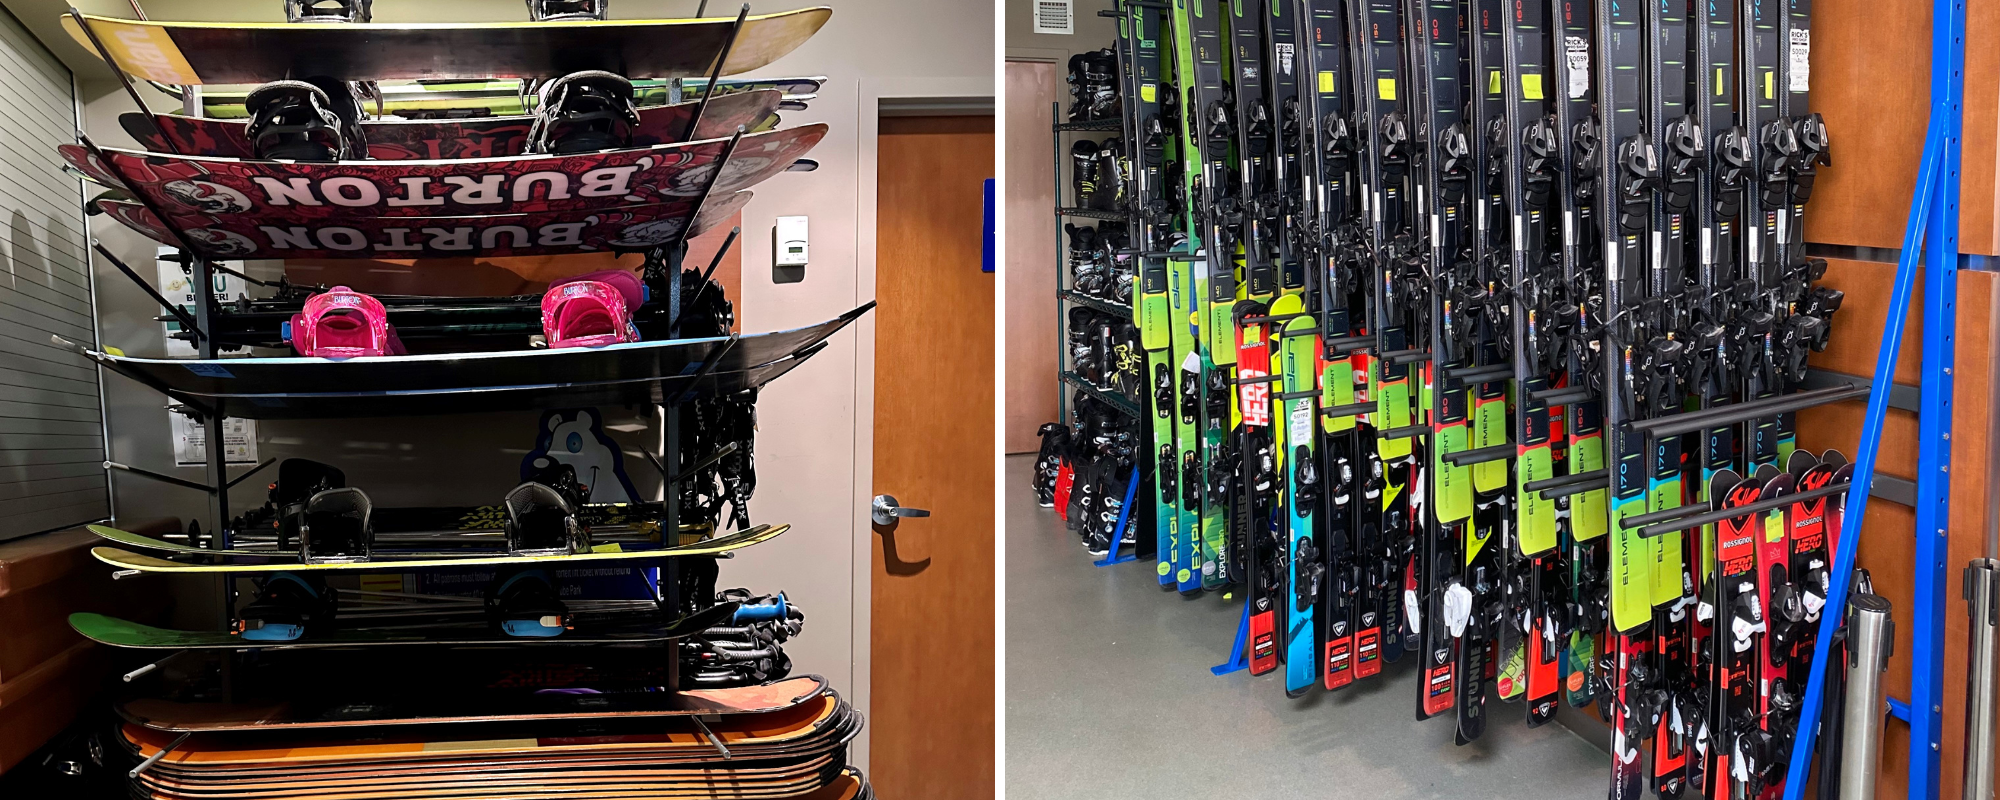 Left: Snowboards on a rack right: skis on a rack